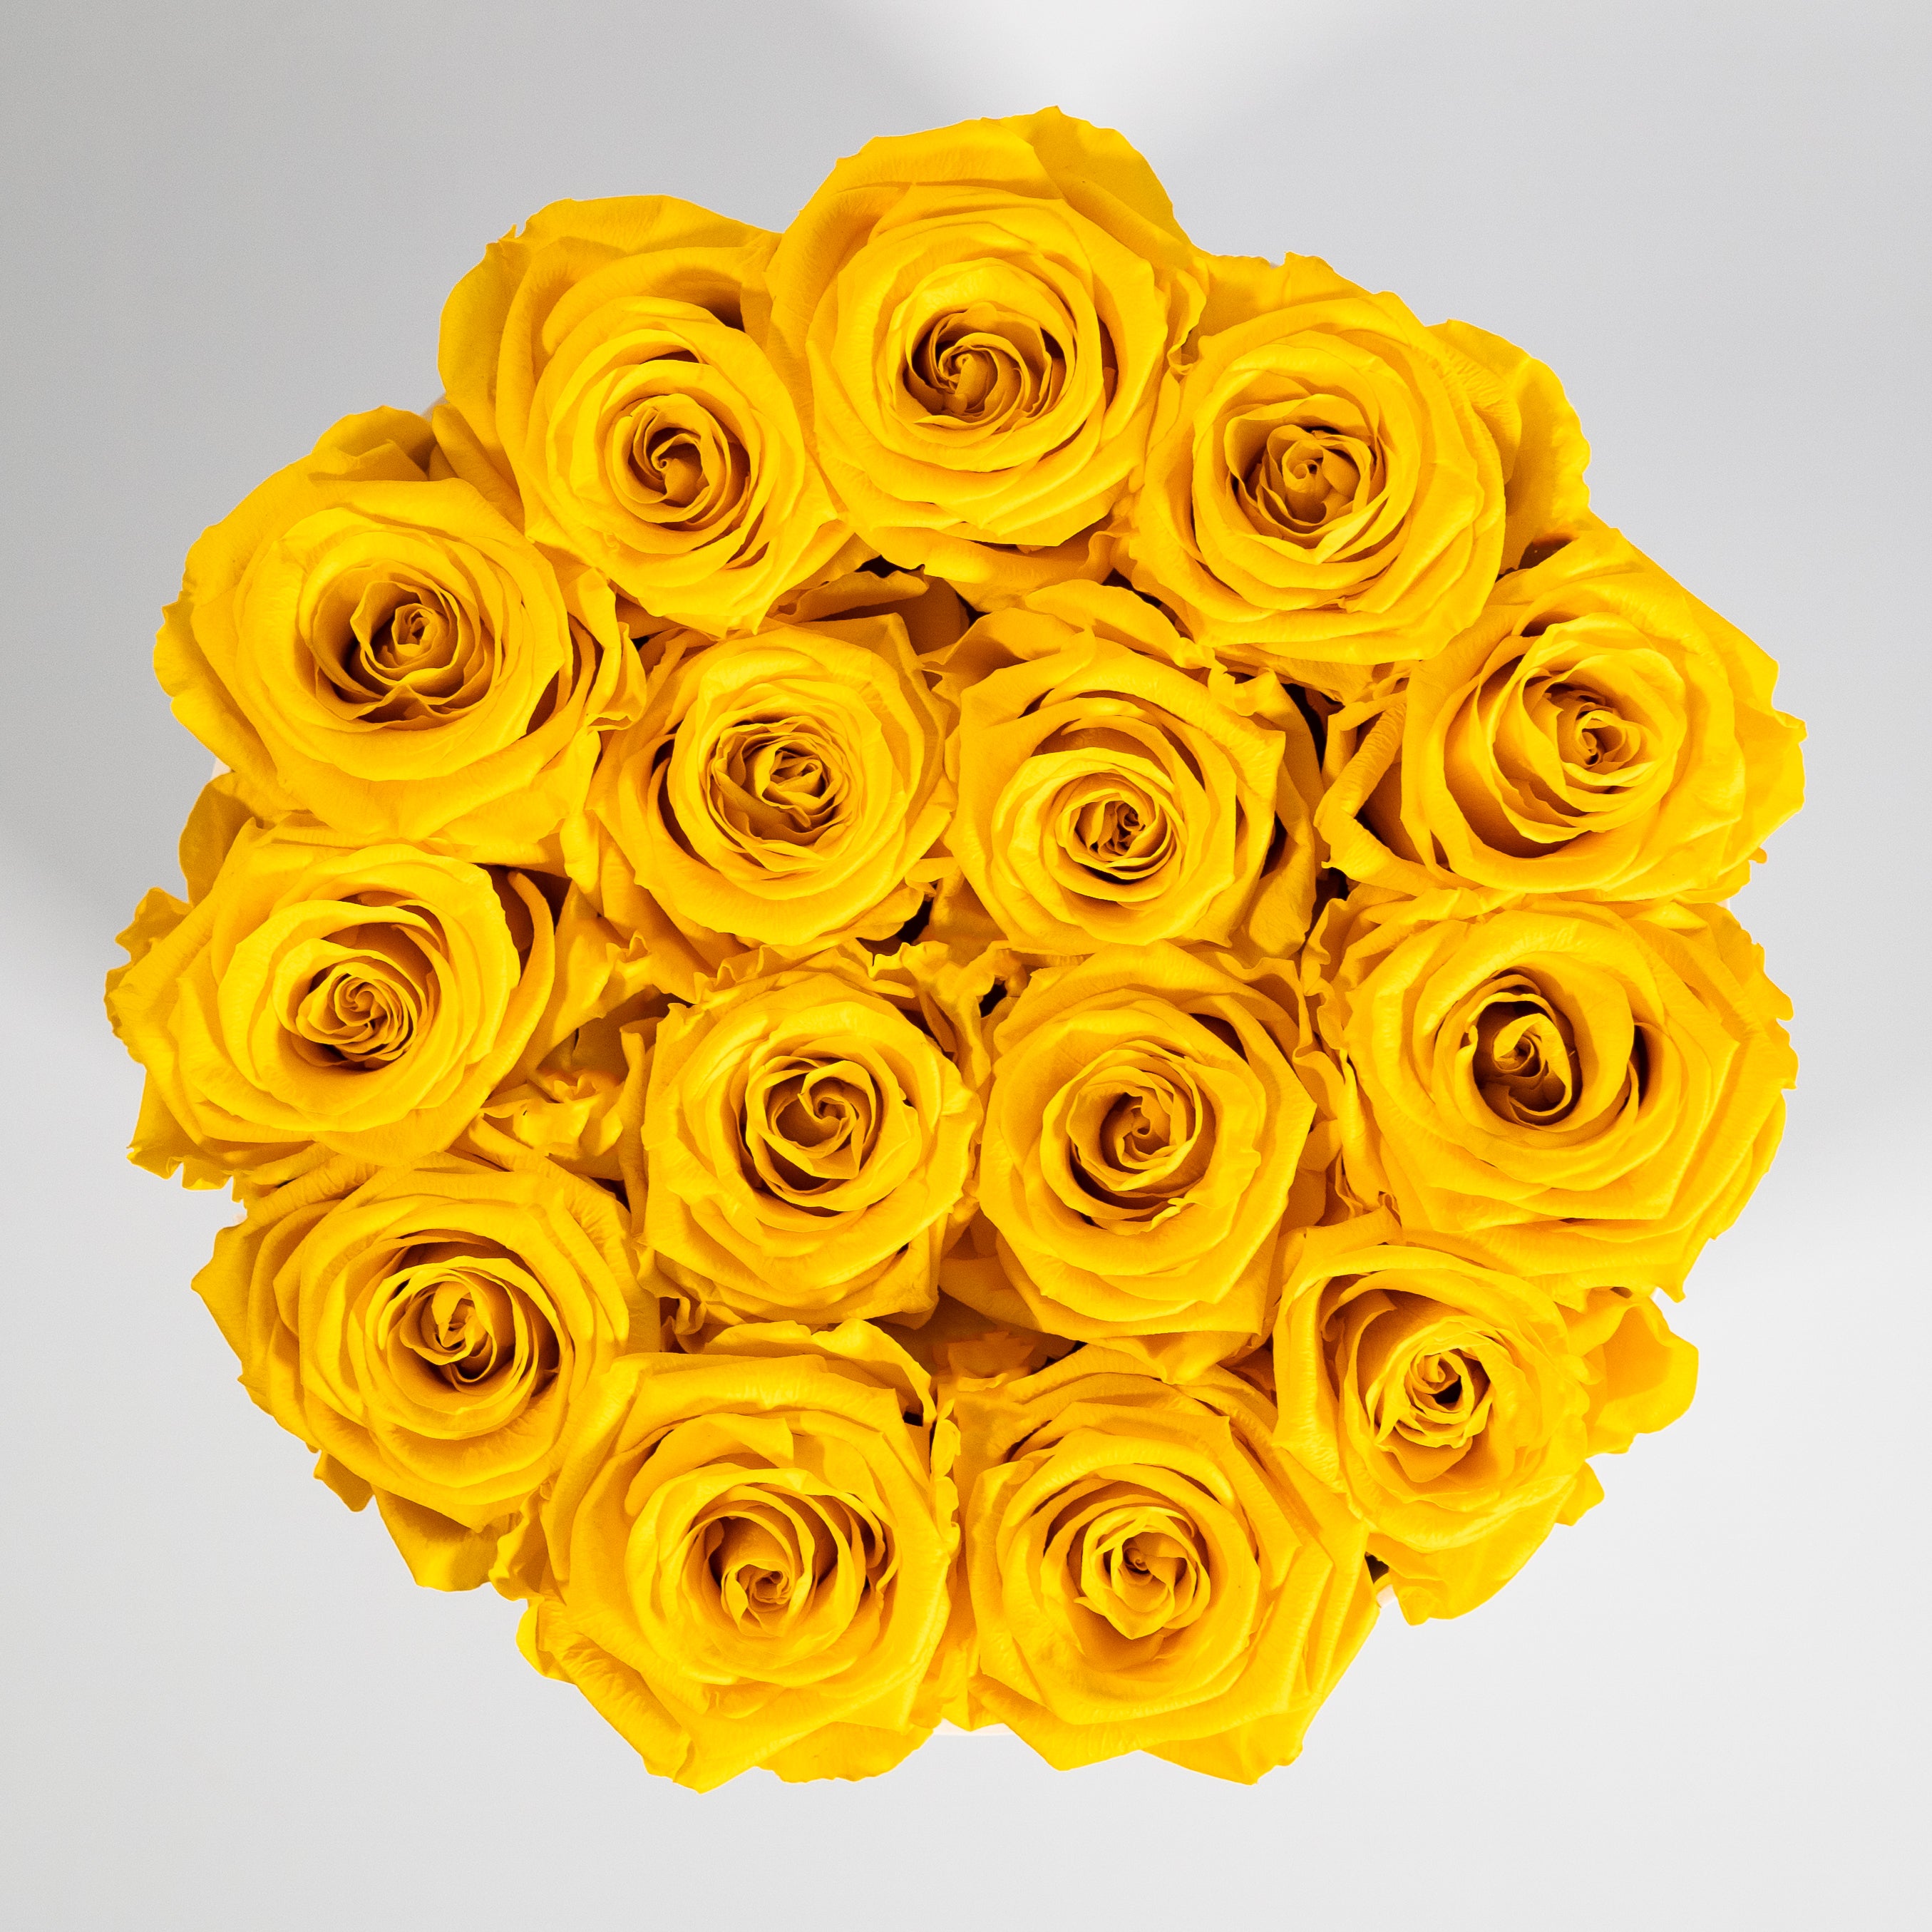 Delightful yellow Roses in a stunning white box 